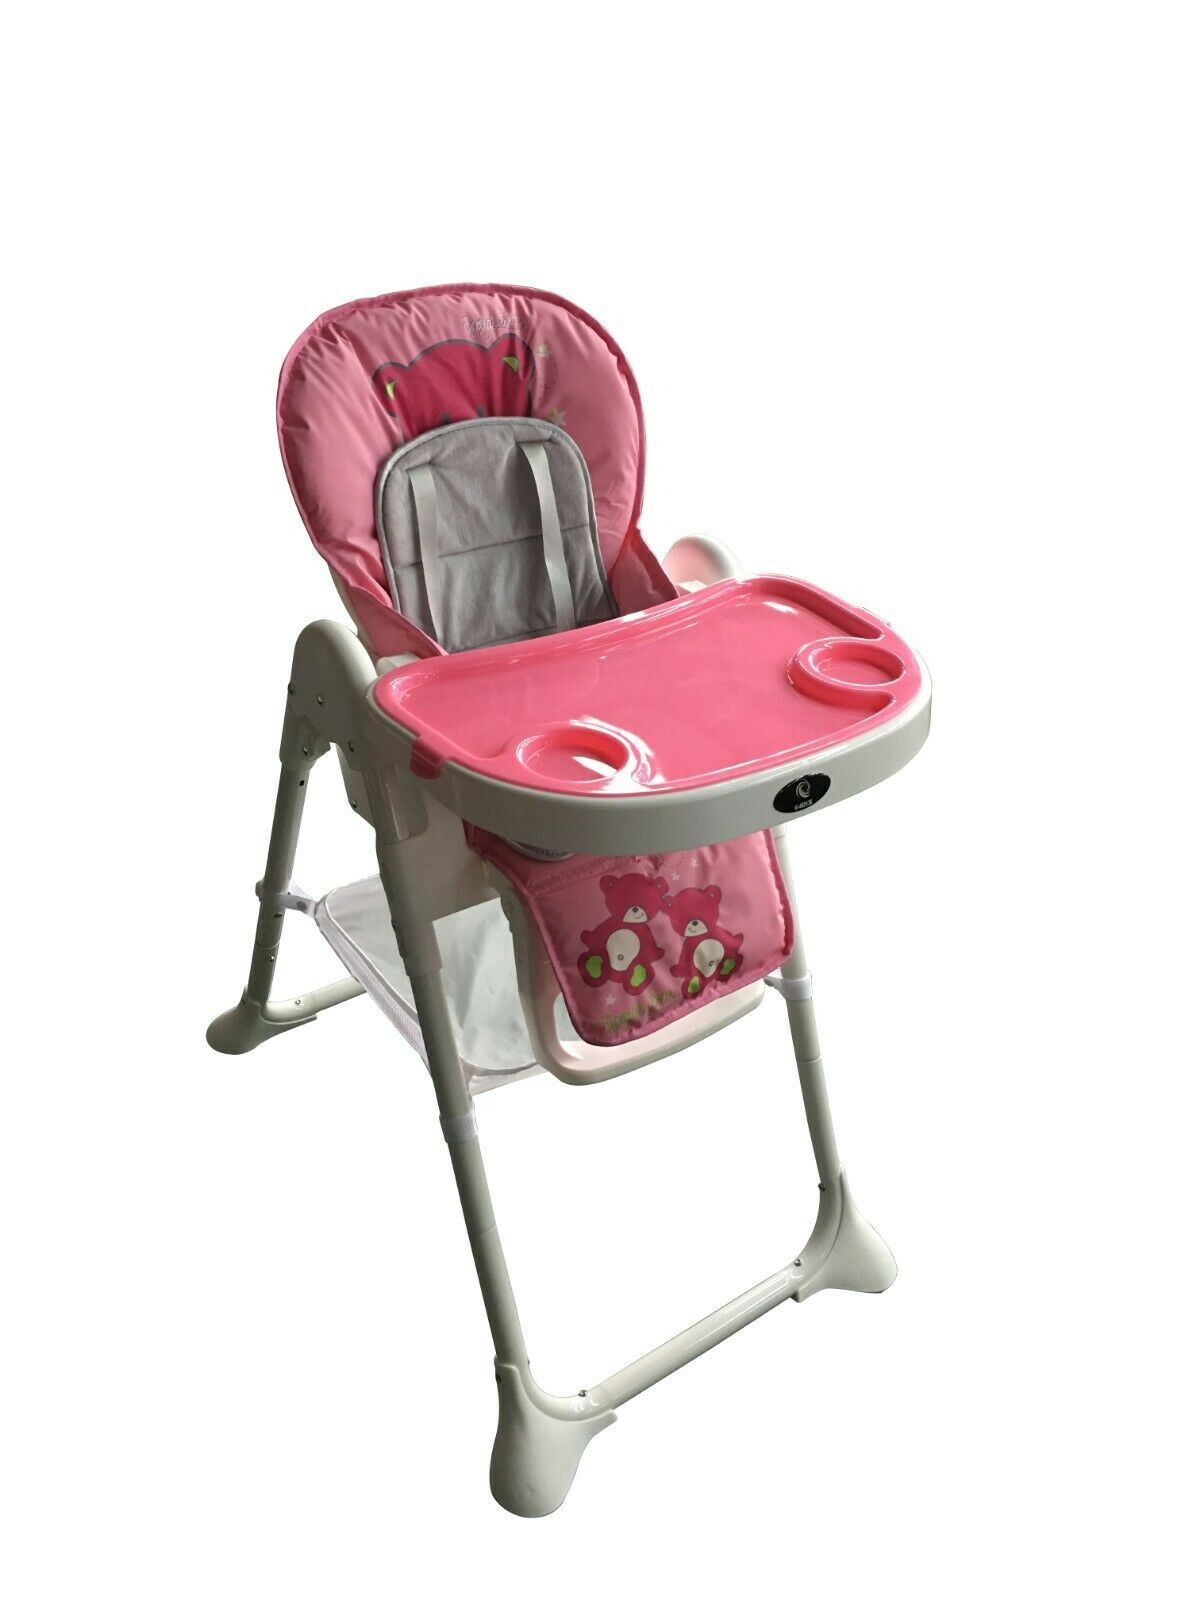 Multifunction Portable 3 IN 1 Baby High Chair Infant Toddler Feeding Nursery UK